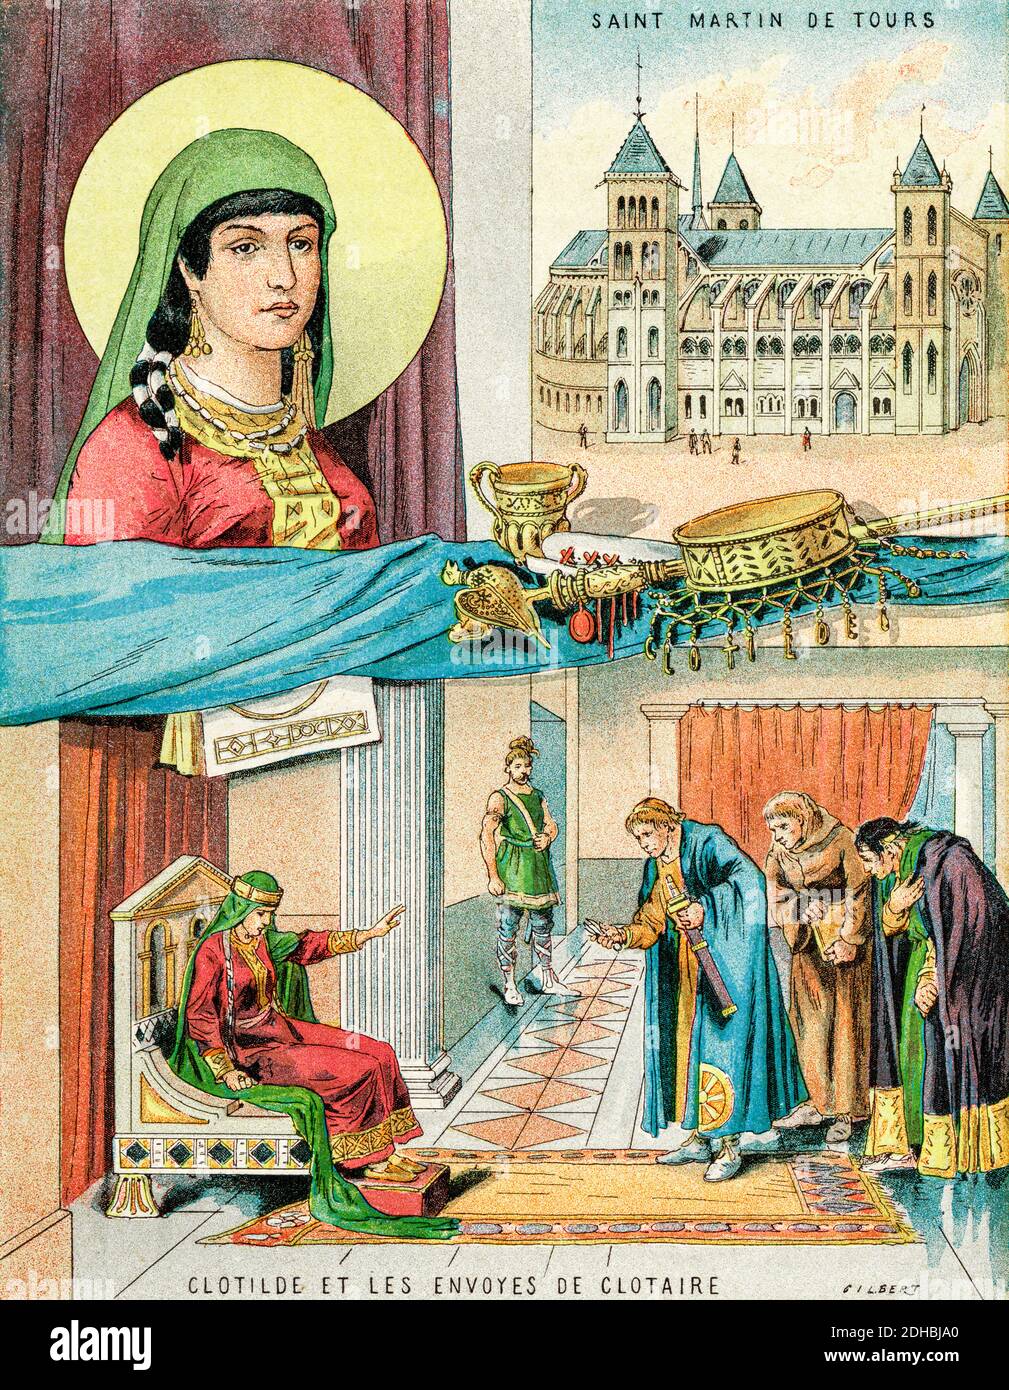 Old color lithography portrait of Saint Clotilde (475-545) Princess of  Burgundy, became Queen of the Franks by marrying Clovis I, whom she helps  convert to Christianity. She was canonized around 550 or